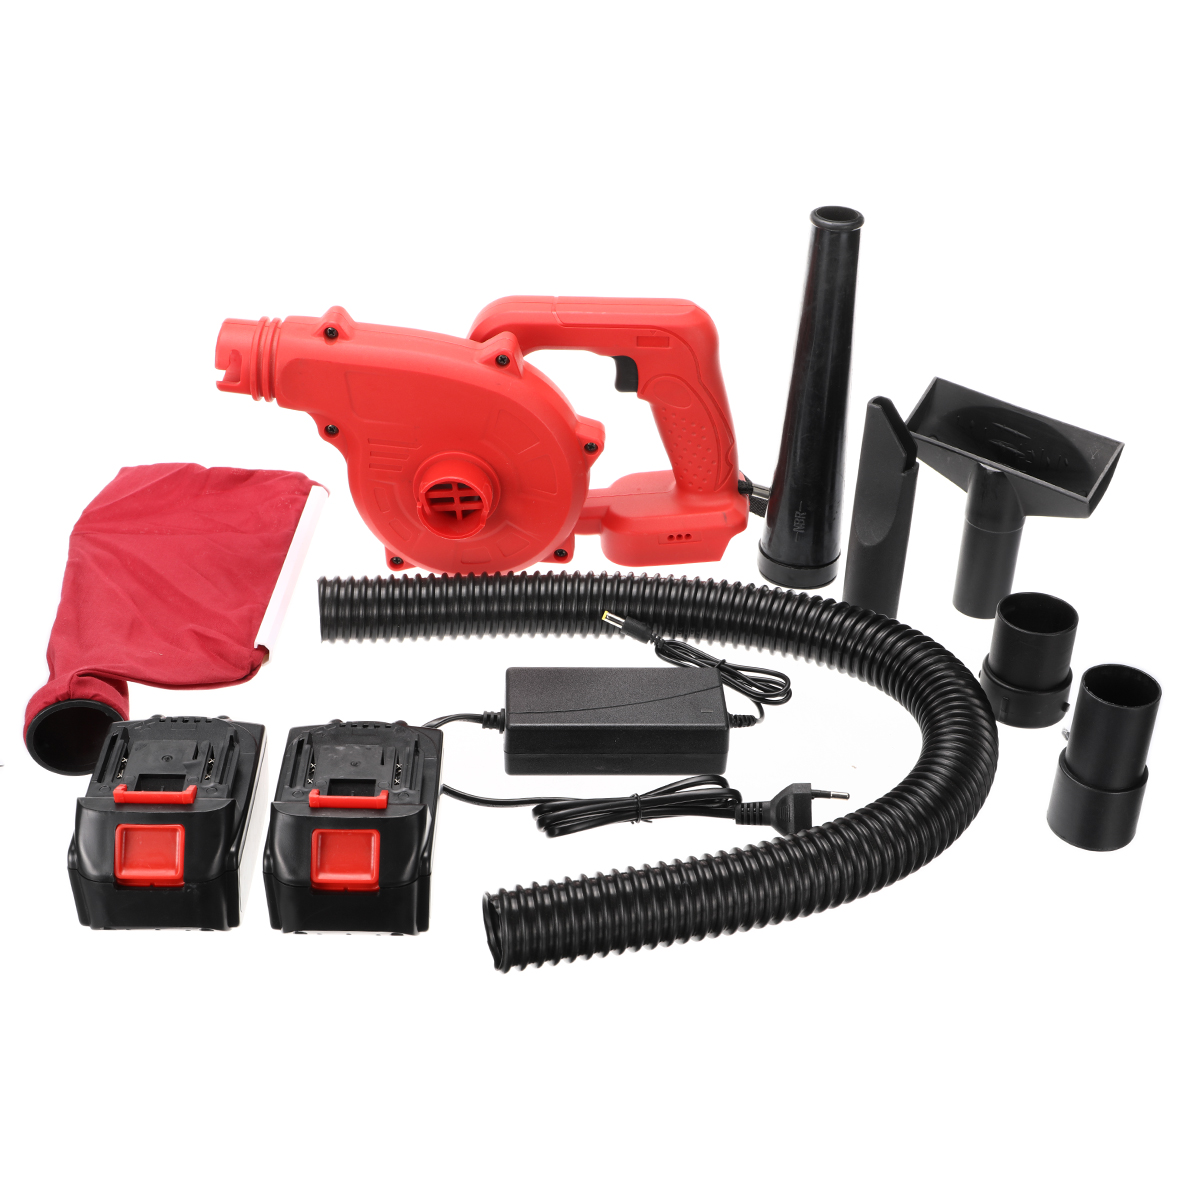 288VF-2-IN-1-Electric-Air-Blower-Kit-Cleaner-Wireless-Air-Fan-Dust-Blowing-Computer-Dust-Collector-A-1855797-5